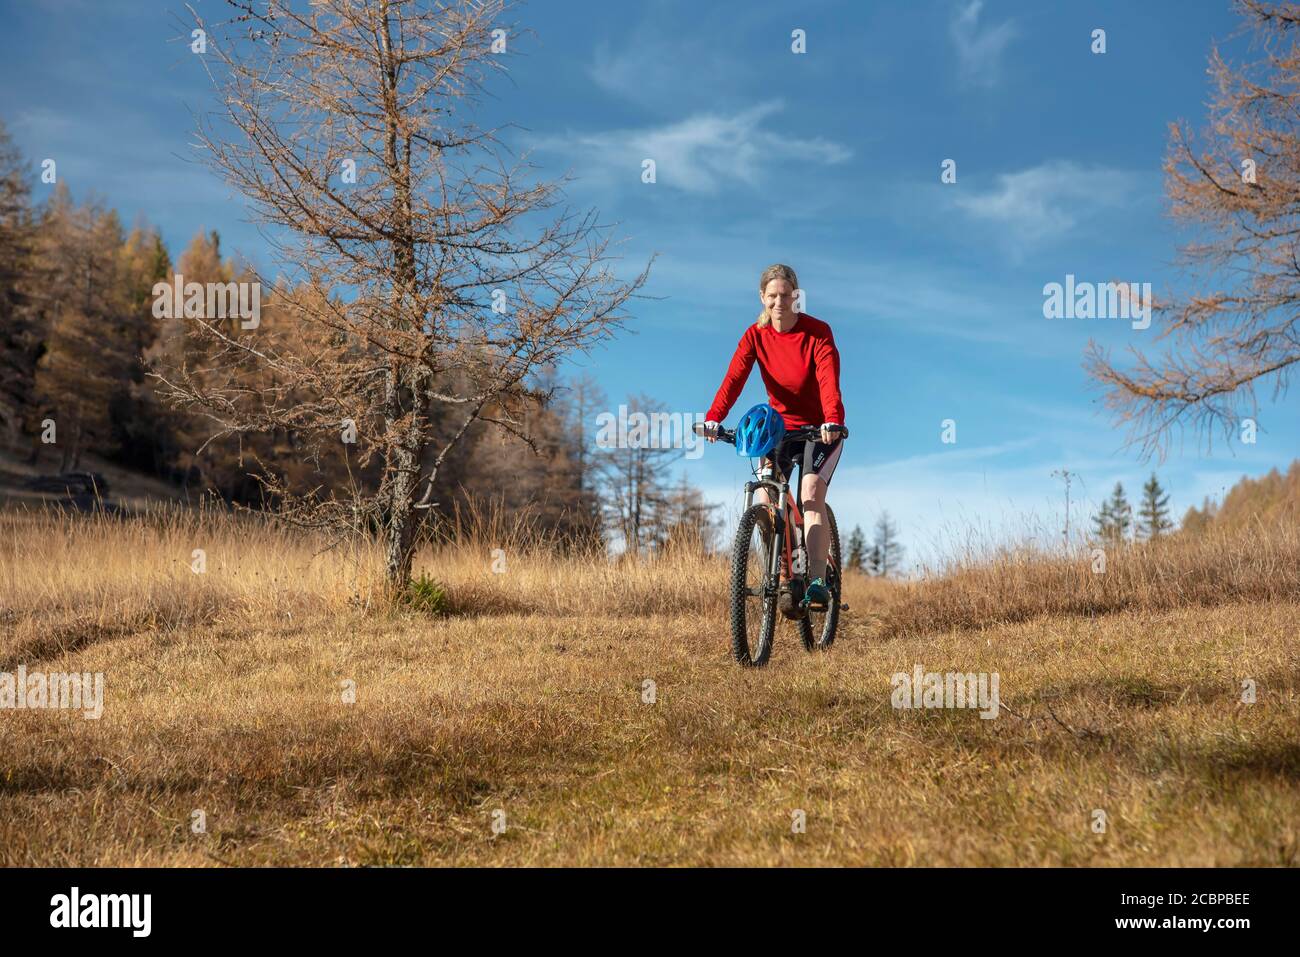 Mountain biker in her late forties, red sweater, on e-MTB in autumnal alpine pasture landscape, Serles, Mieders, Tyrol, Austria Stock Photo